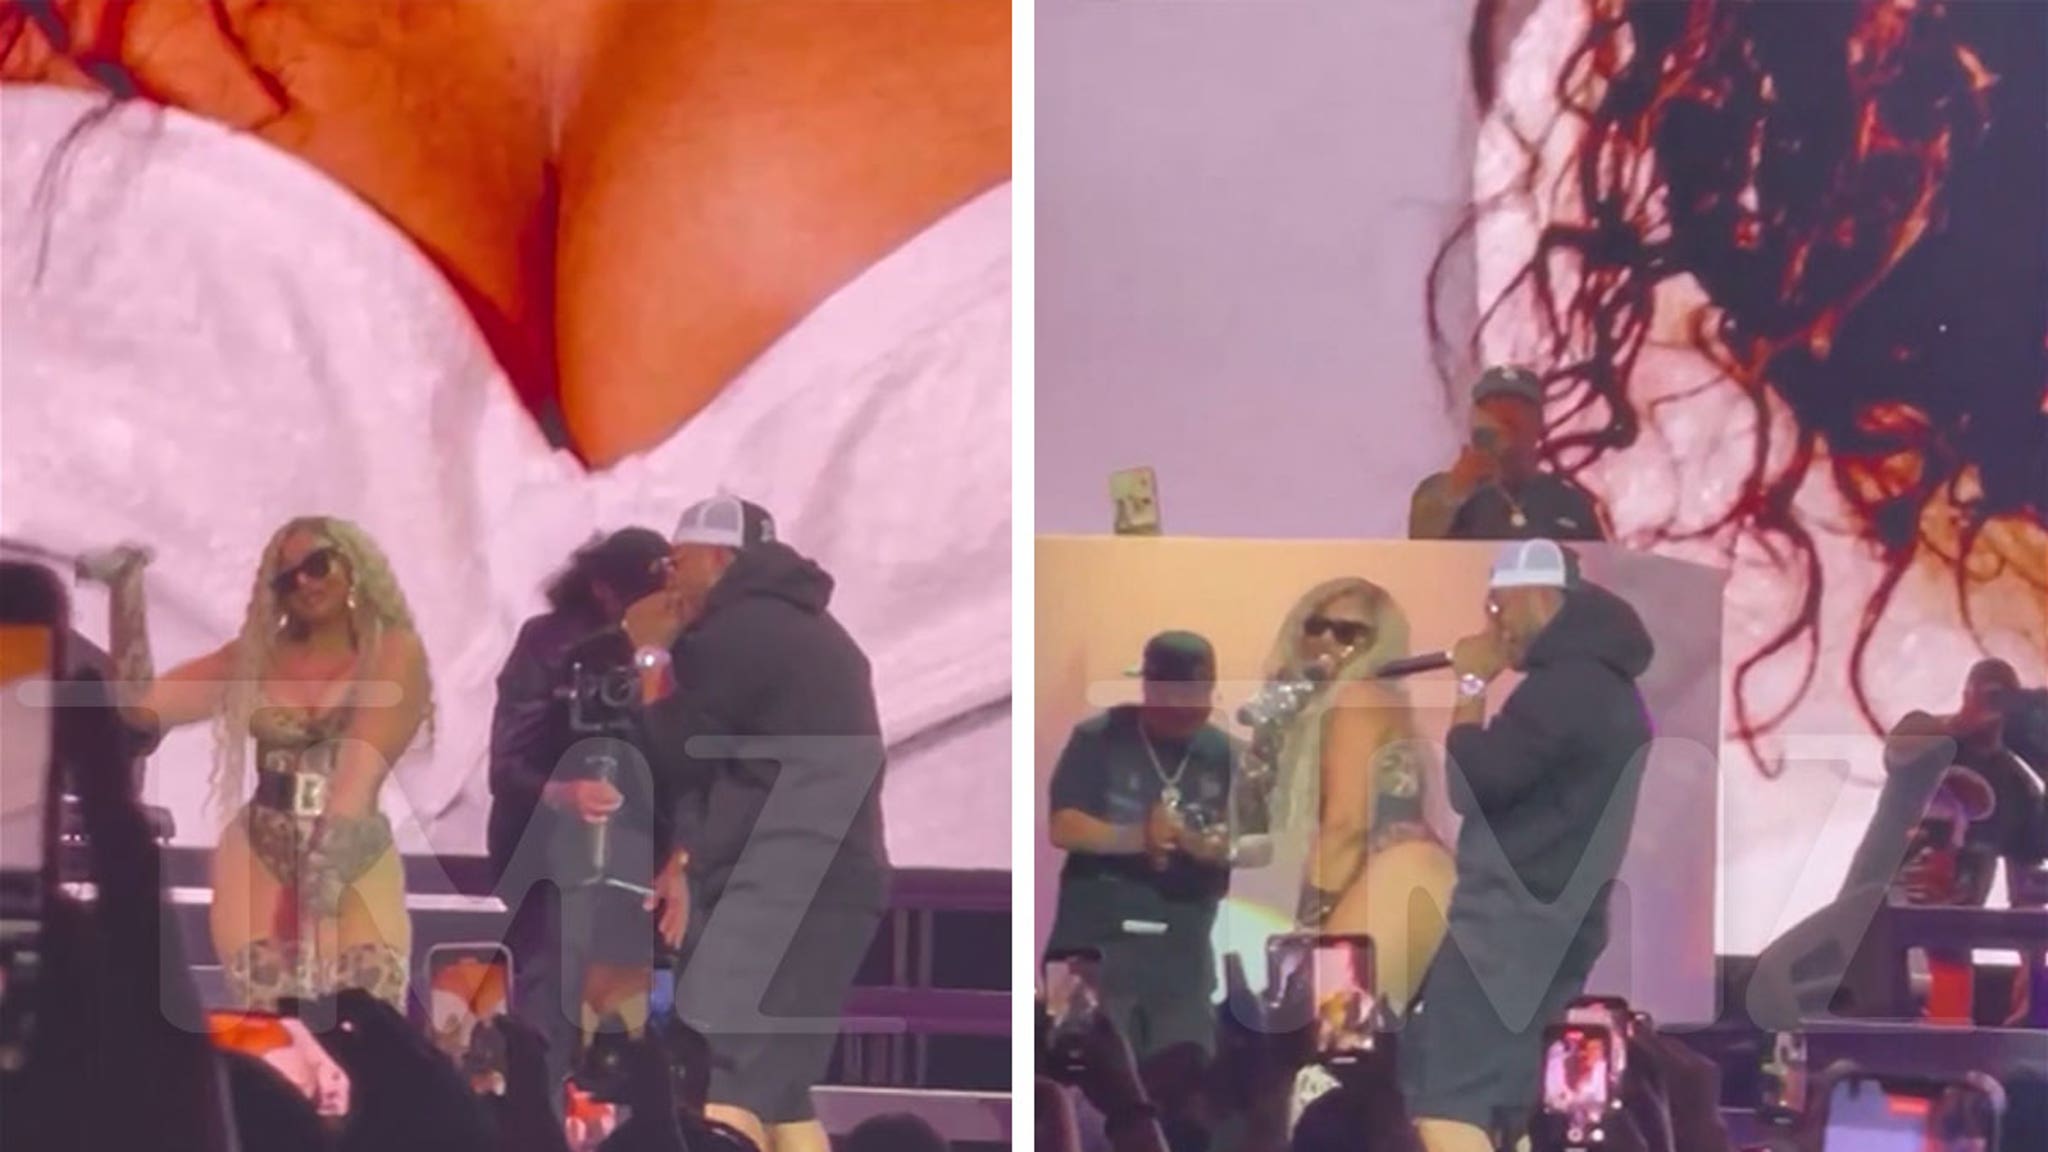 Ashanti brings out Nelly during Las Vegas concert